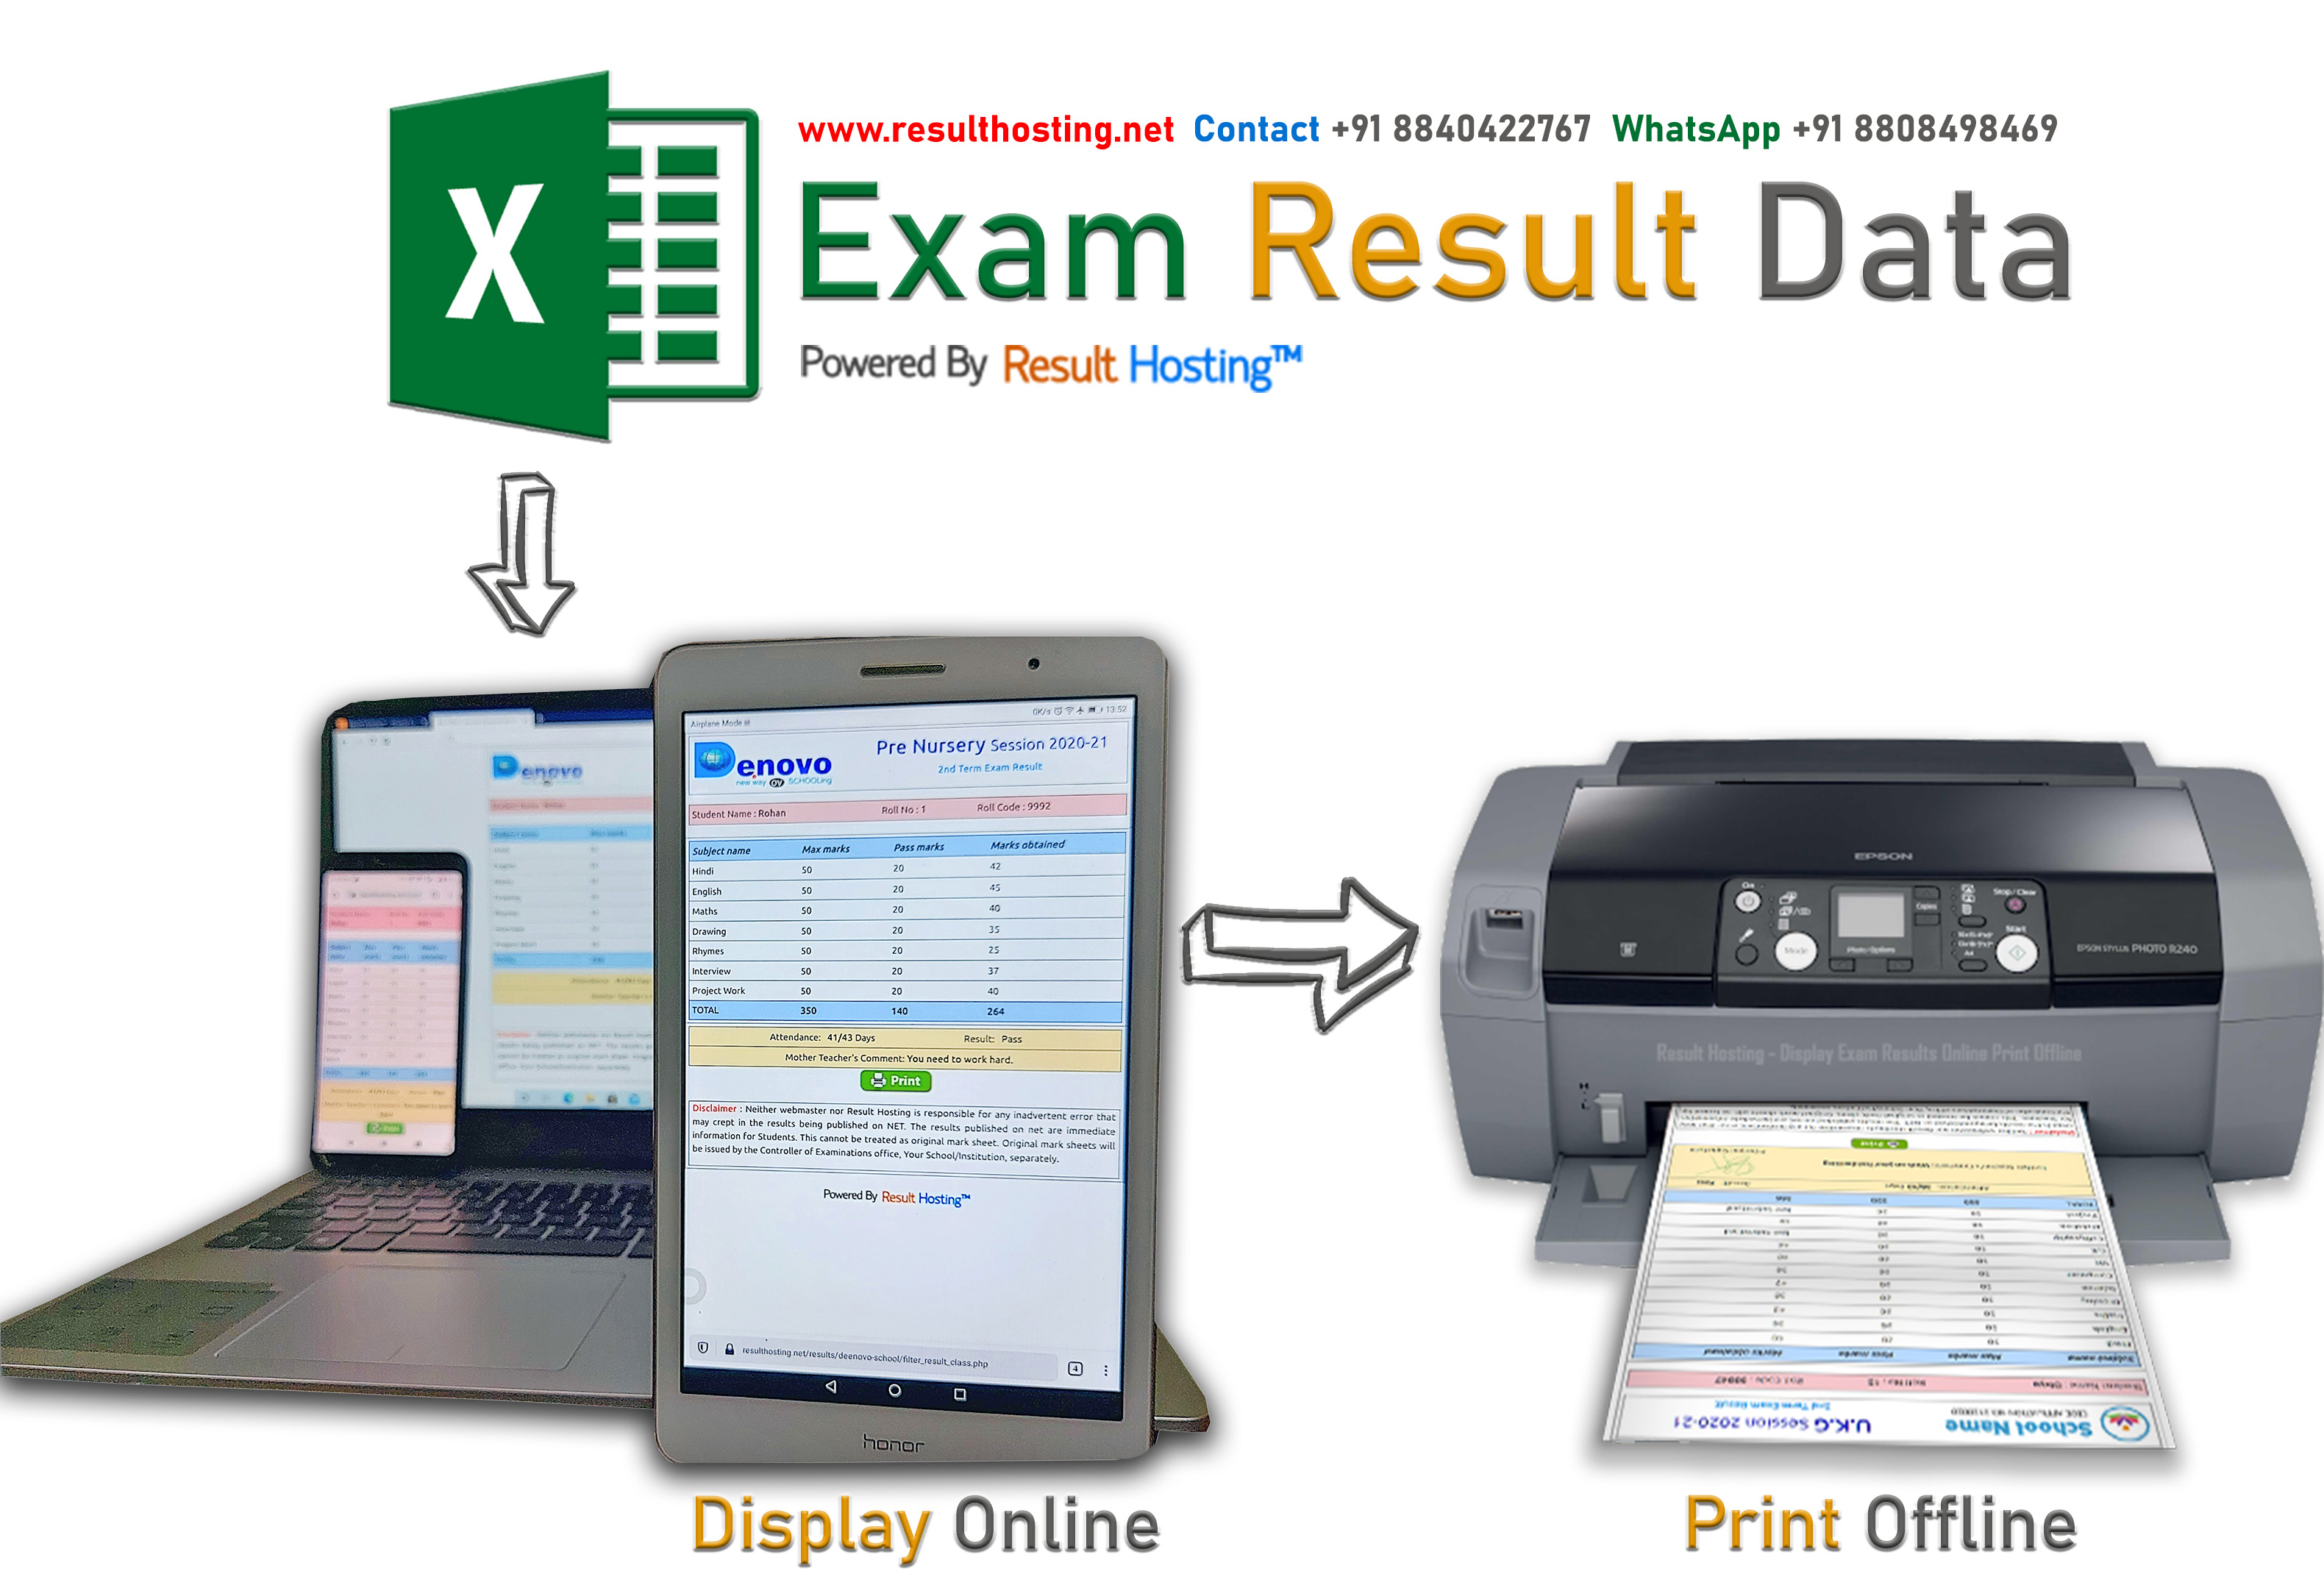 how-to-show-exam-results-online-print-offline-using-resulthosting